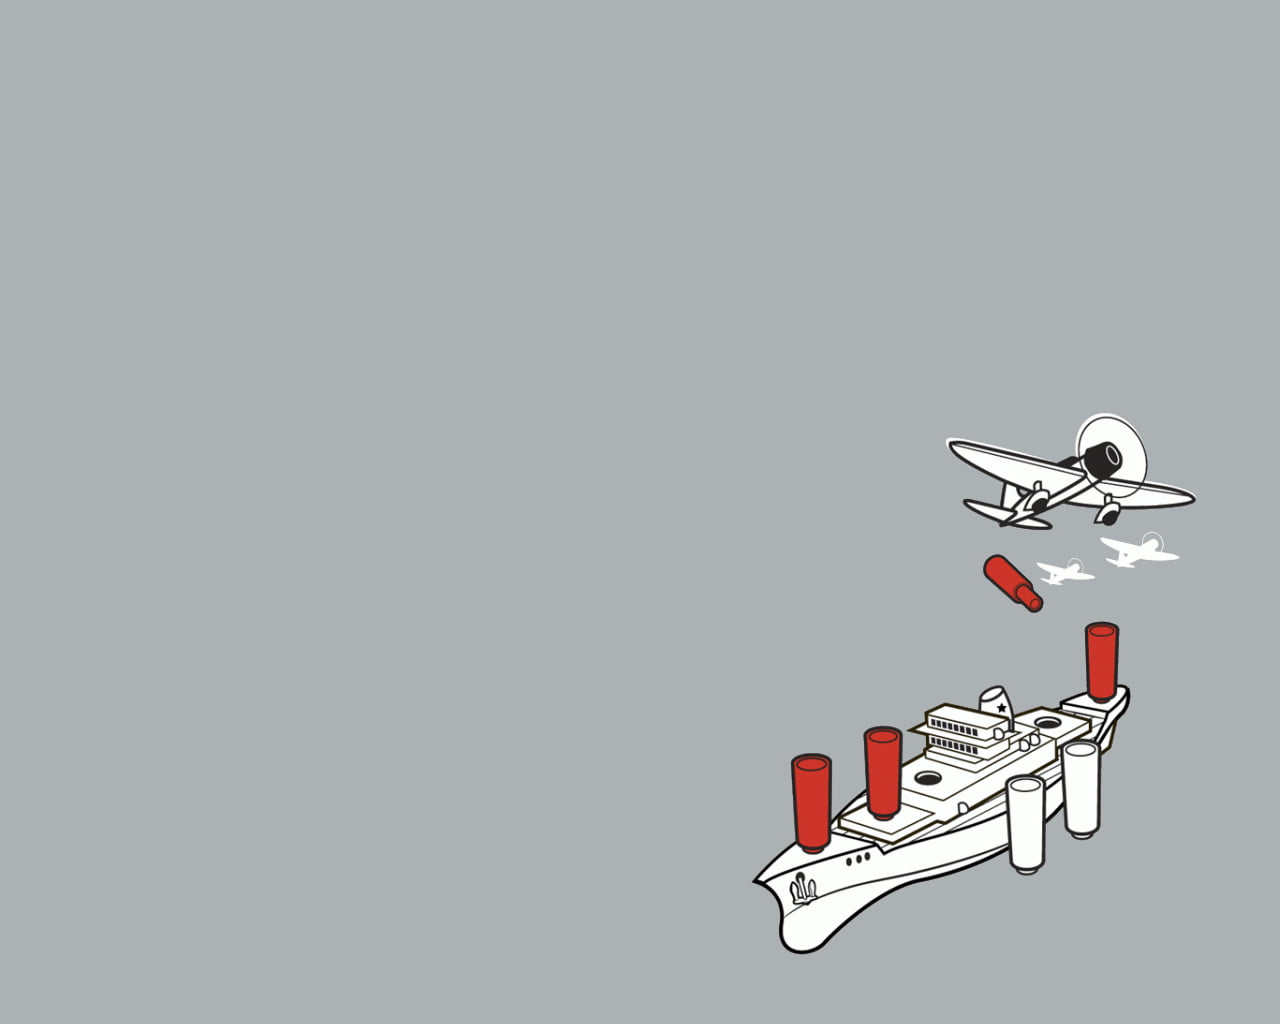 ship and aircraft illustration, threadless, simple, airplane, gray